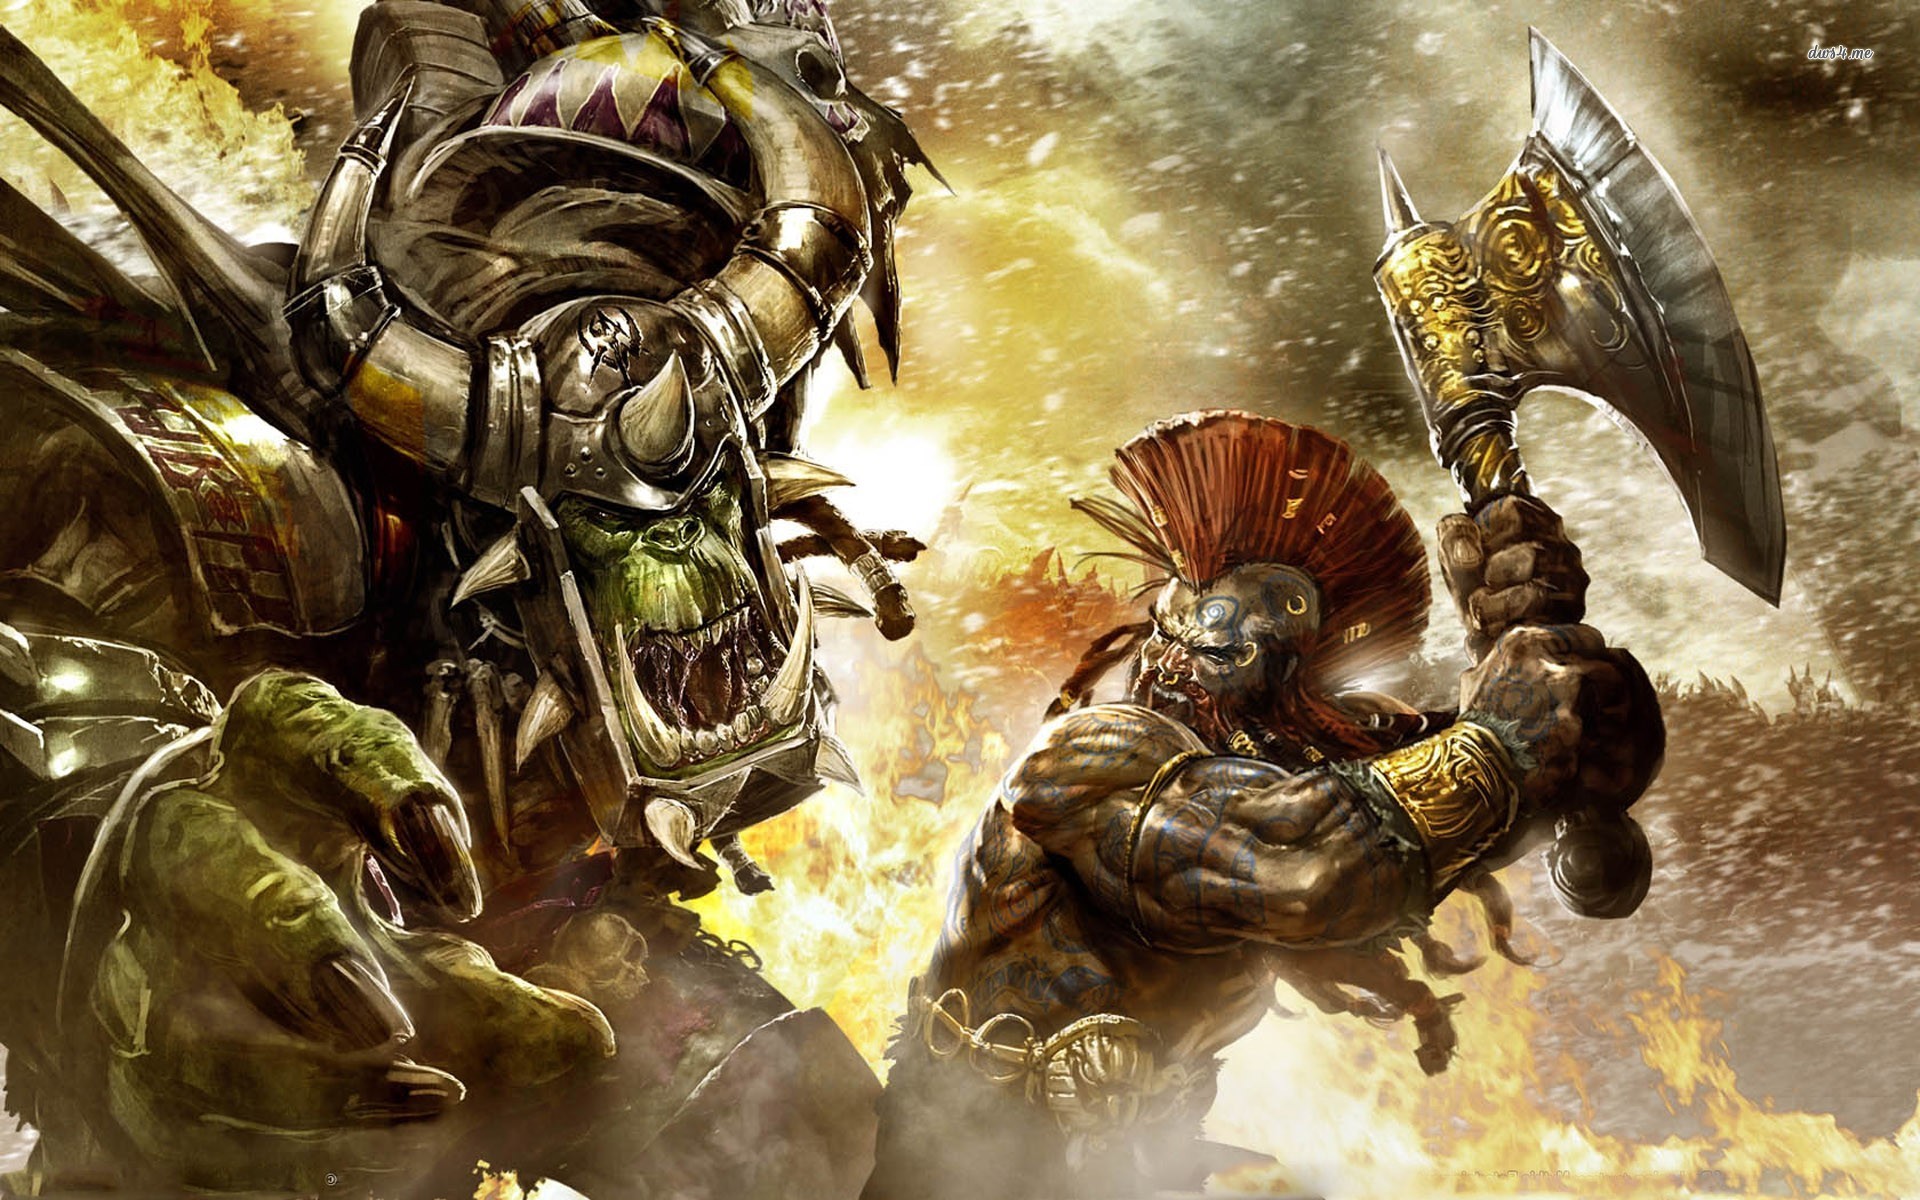 Warhammer Online Wallpapers, Pictures, Images